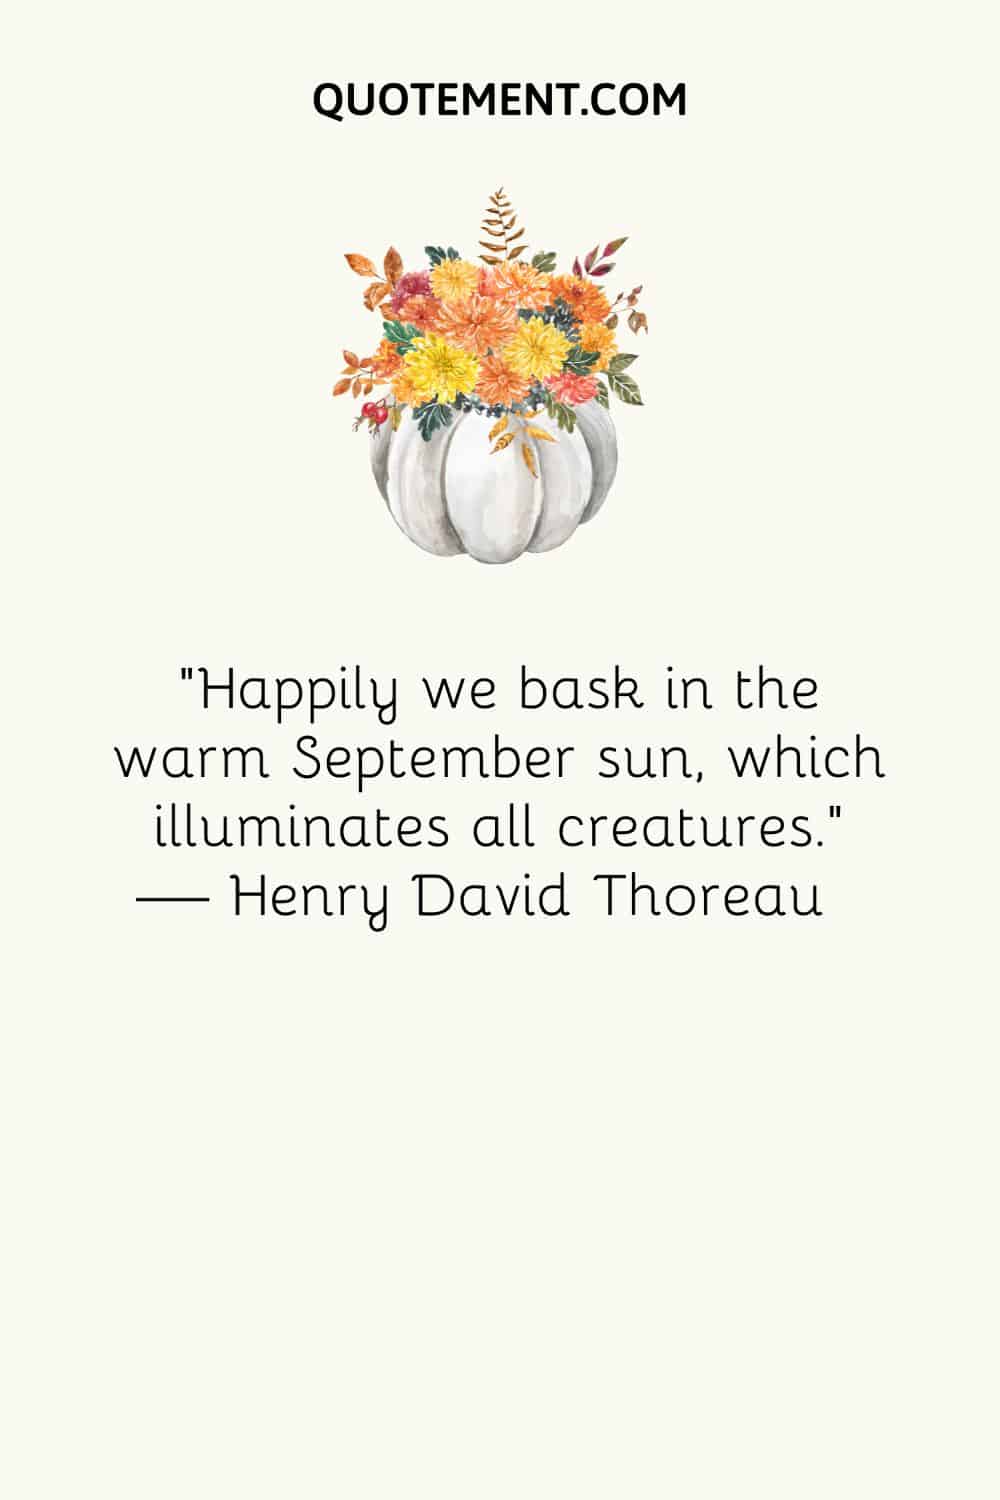 flowers in a vase illustration representing September quote